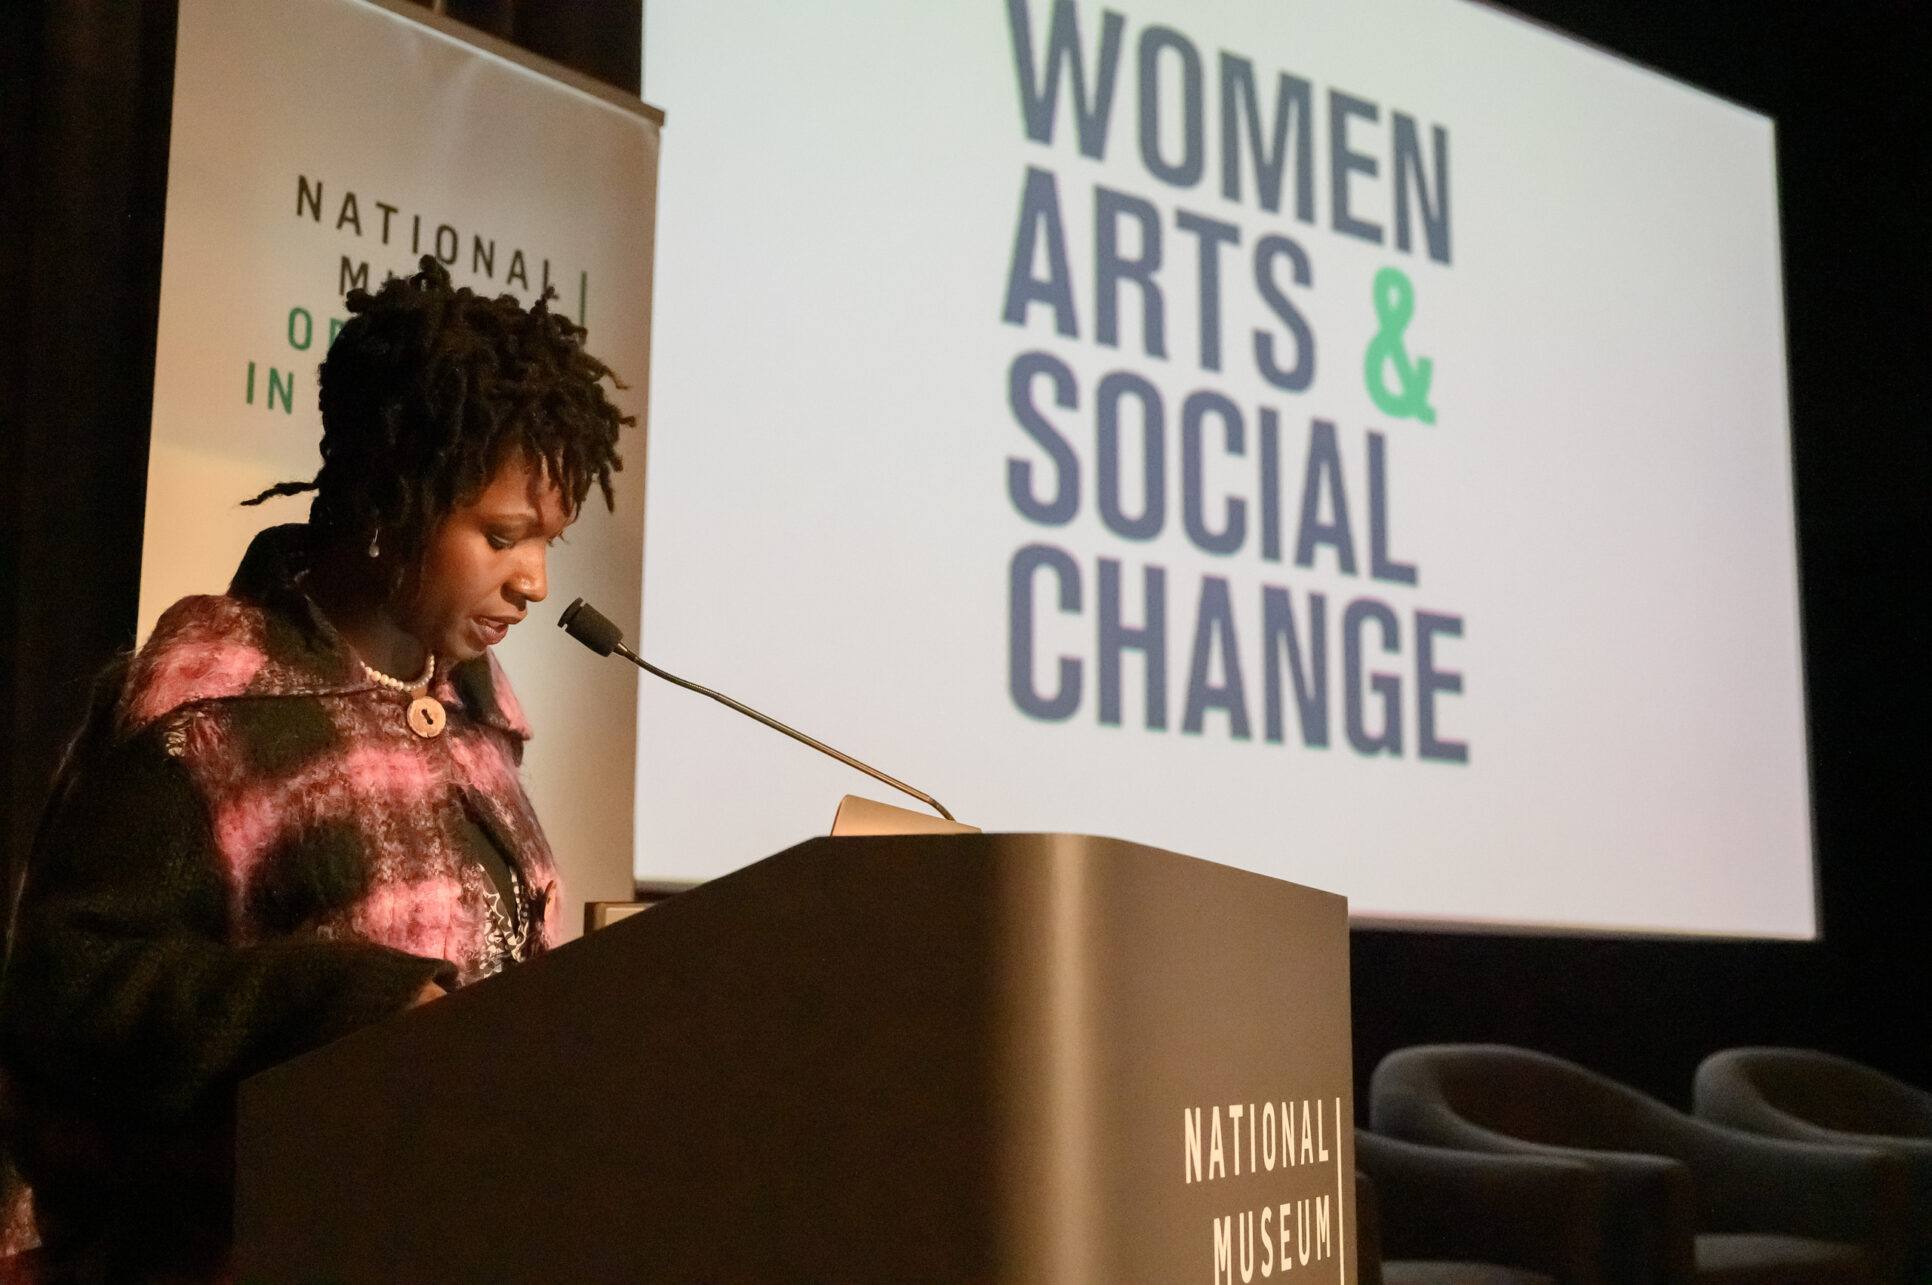 A dark-skinned adult woman stands at a podium at the National Museum of Women in the Arts to speak. She has short dreadlocks, jewelry, and a jacket with a large purple and black plaid print on it. Behind her is a screen with the words 'Women, Arts, & Social Change.'